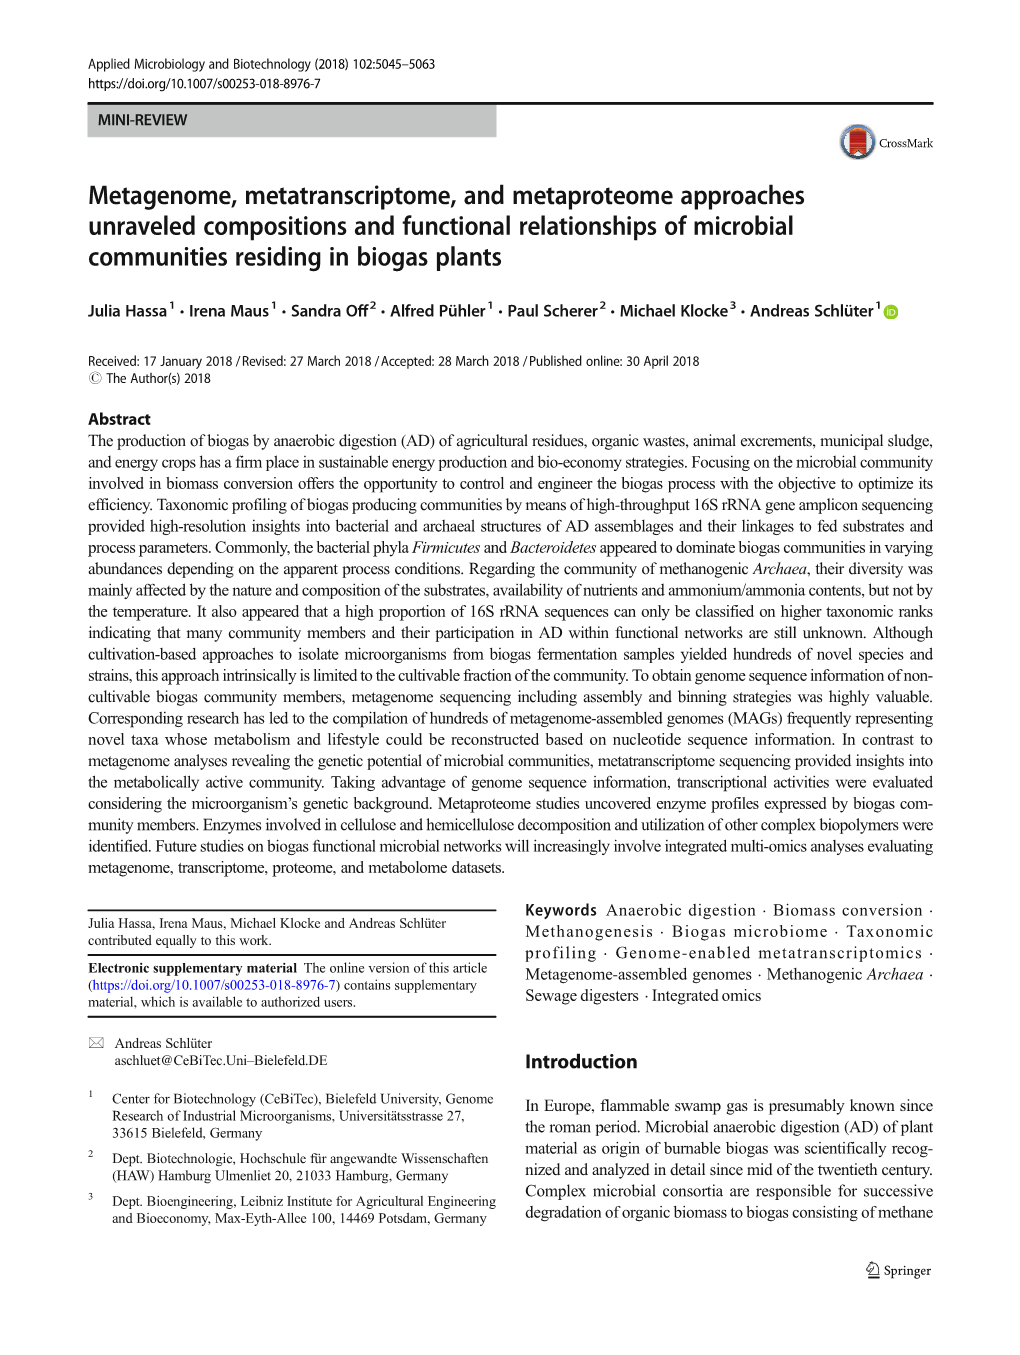 Metagenome, Metatranscriptome, and Metaproteome Approaches Unraveled Compositions and Functional Relationships of Microbial Communities Residing in Biogas Plants